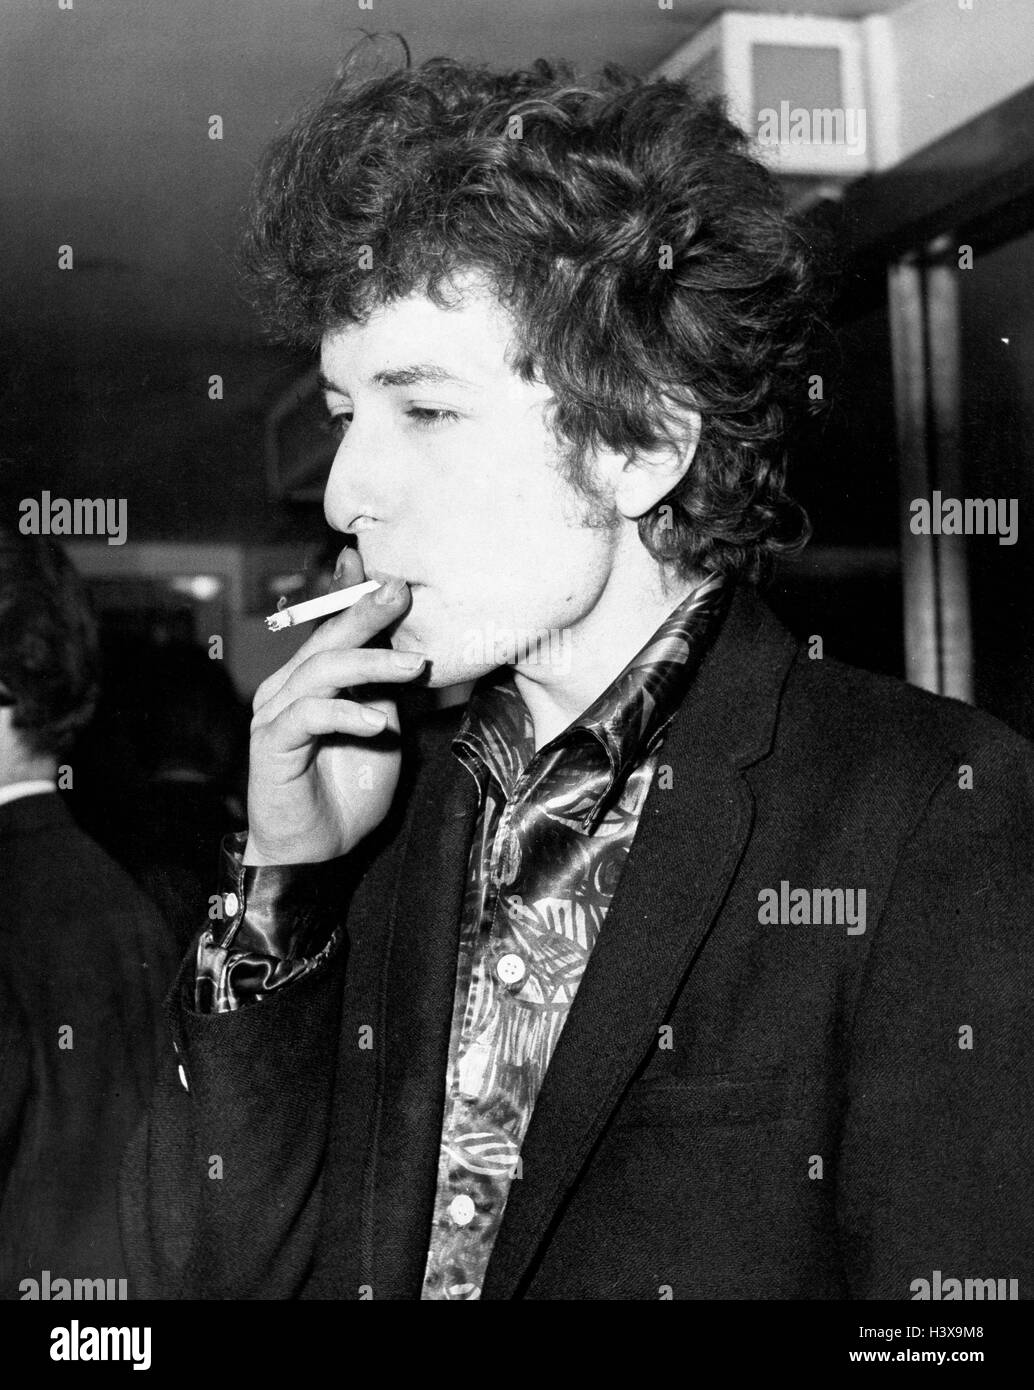 London, UK, U.K. 27th Apr, 1965. Folk Singer BOB DYLAN smoking a cigarette. Dylan is in town for his British tour at The Savoy Hotel. © KEYSTONE Pictures/ZUMAPRESS.com/Alamy Live News Stock Photo